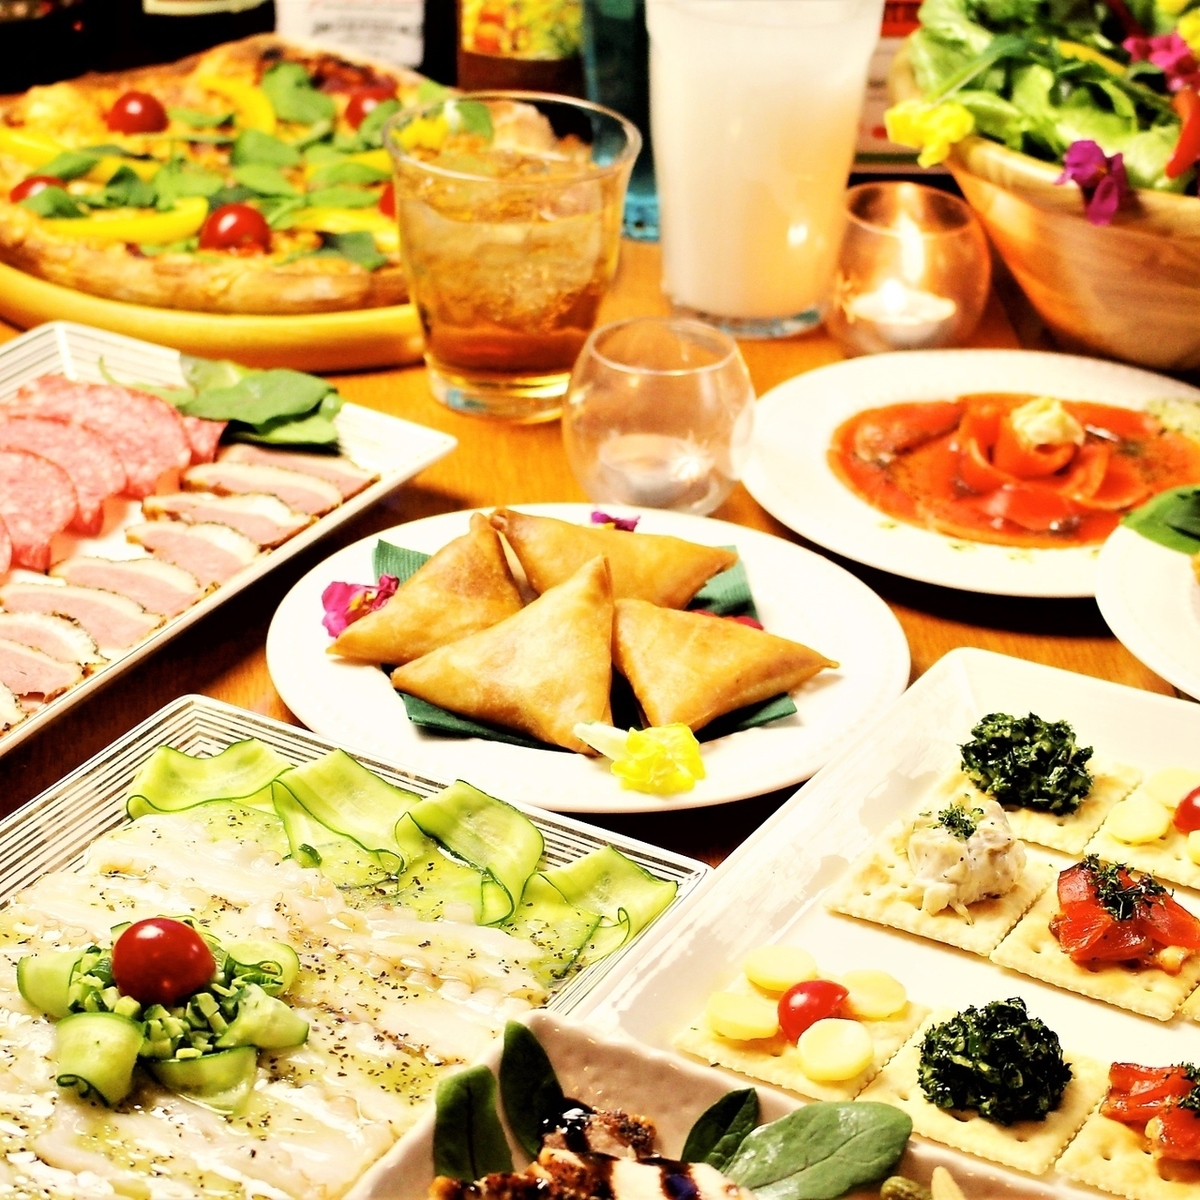 We have prepared a course that is perfect for a chartered year-end party in Shibuya!